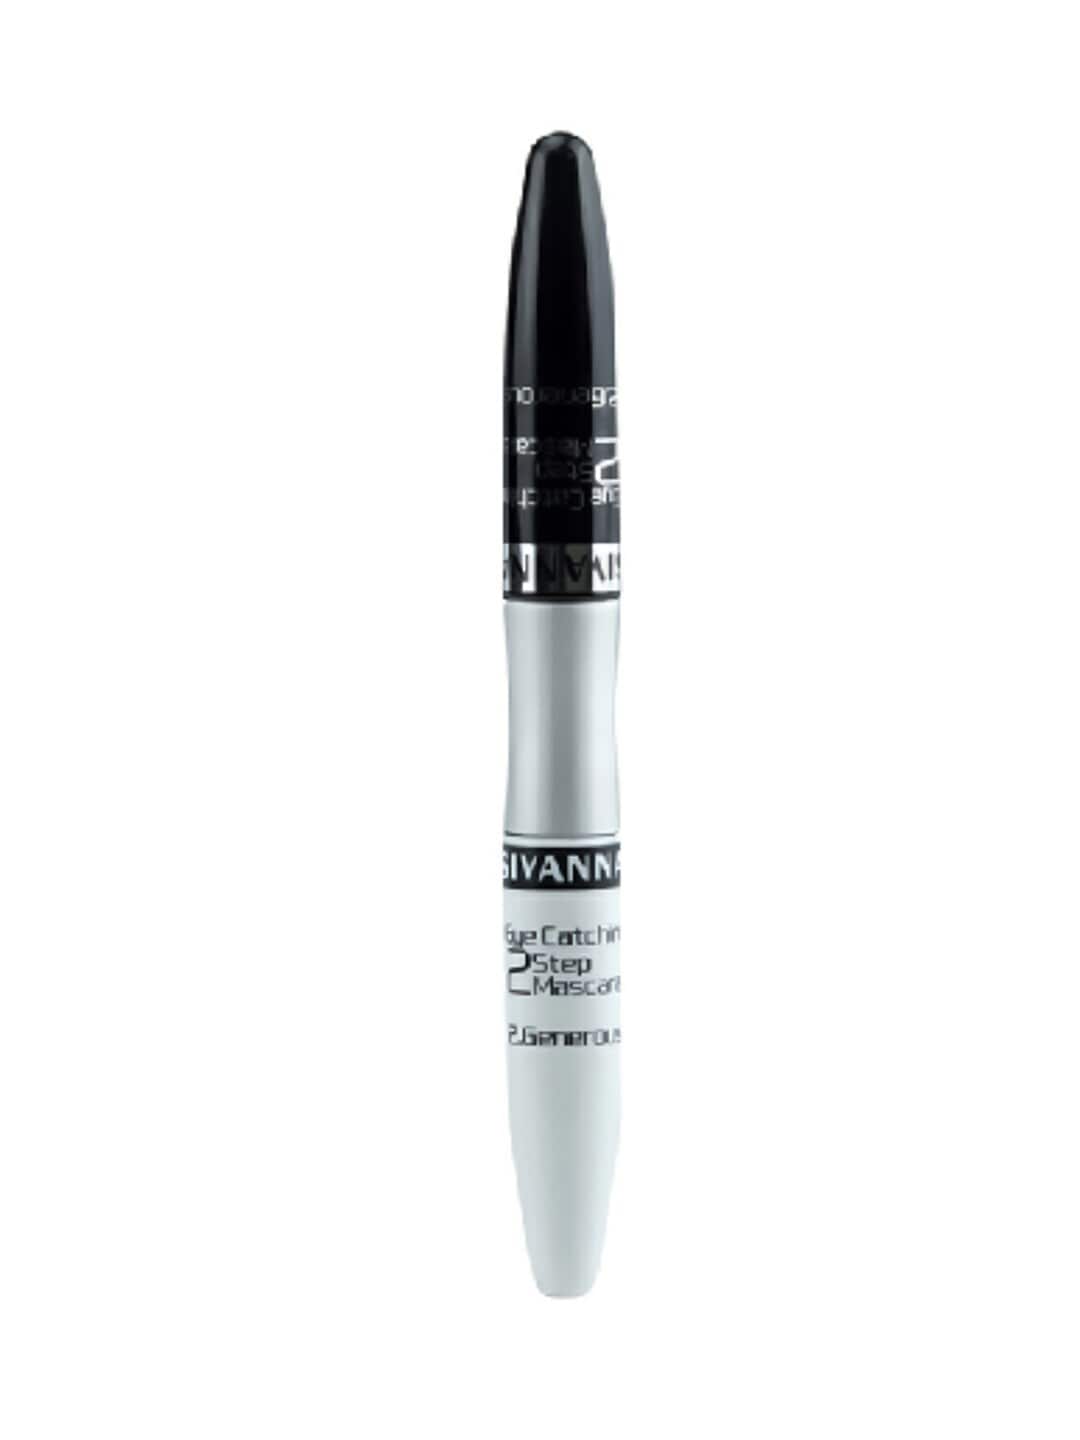 Sivanna Colors Eye Catching 2 Step Lively & Slender Mascara - Black 6192 Price in India